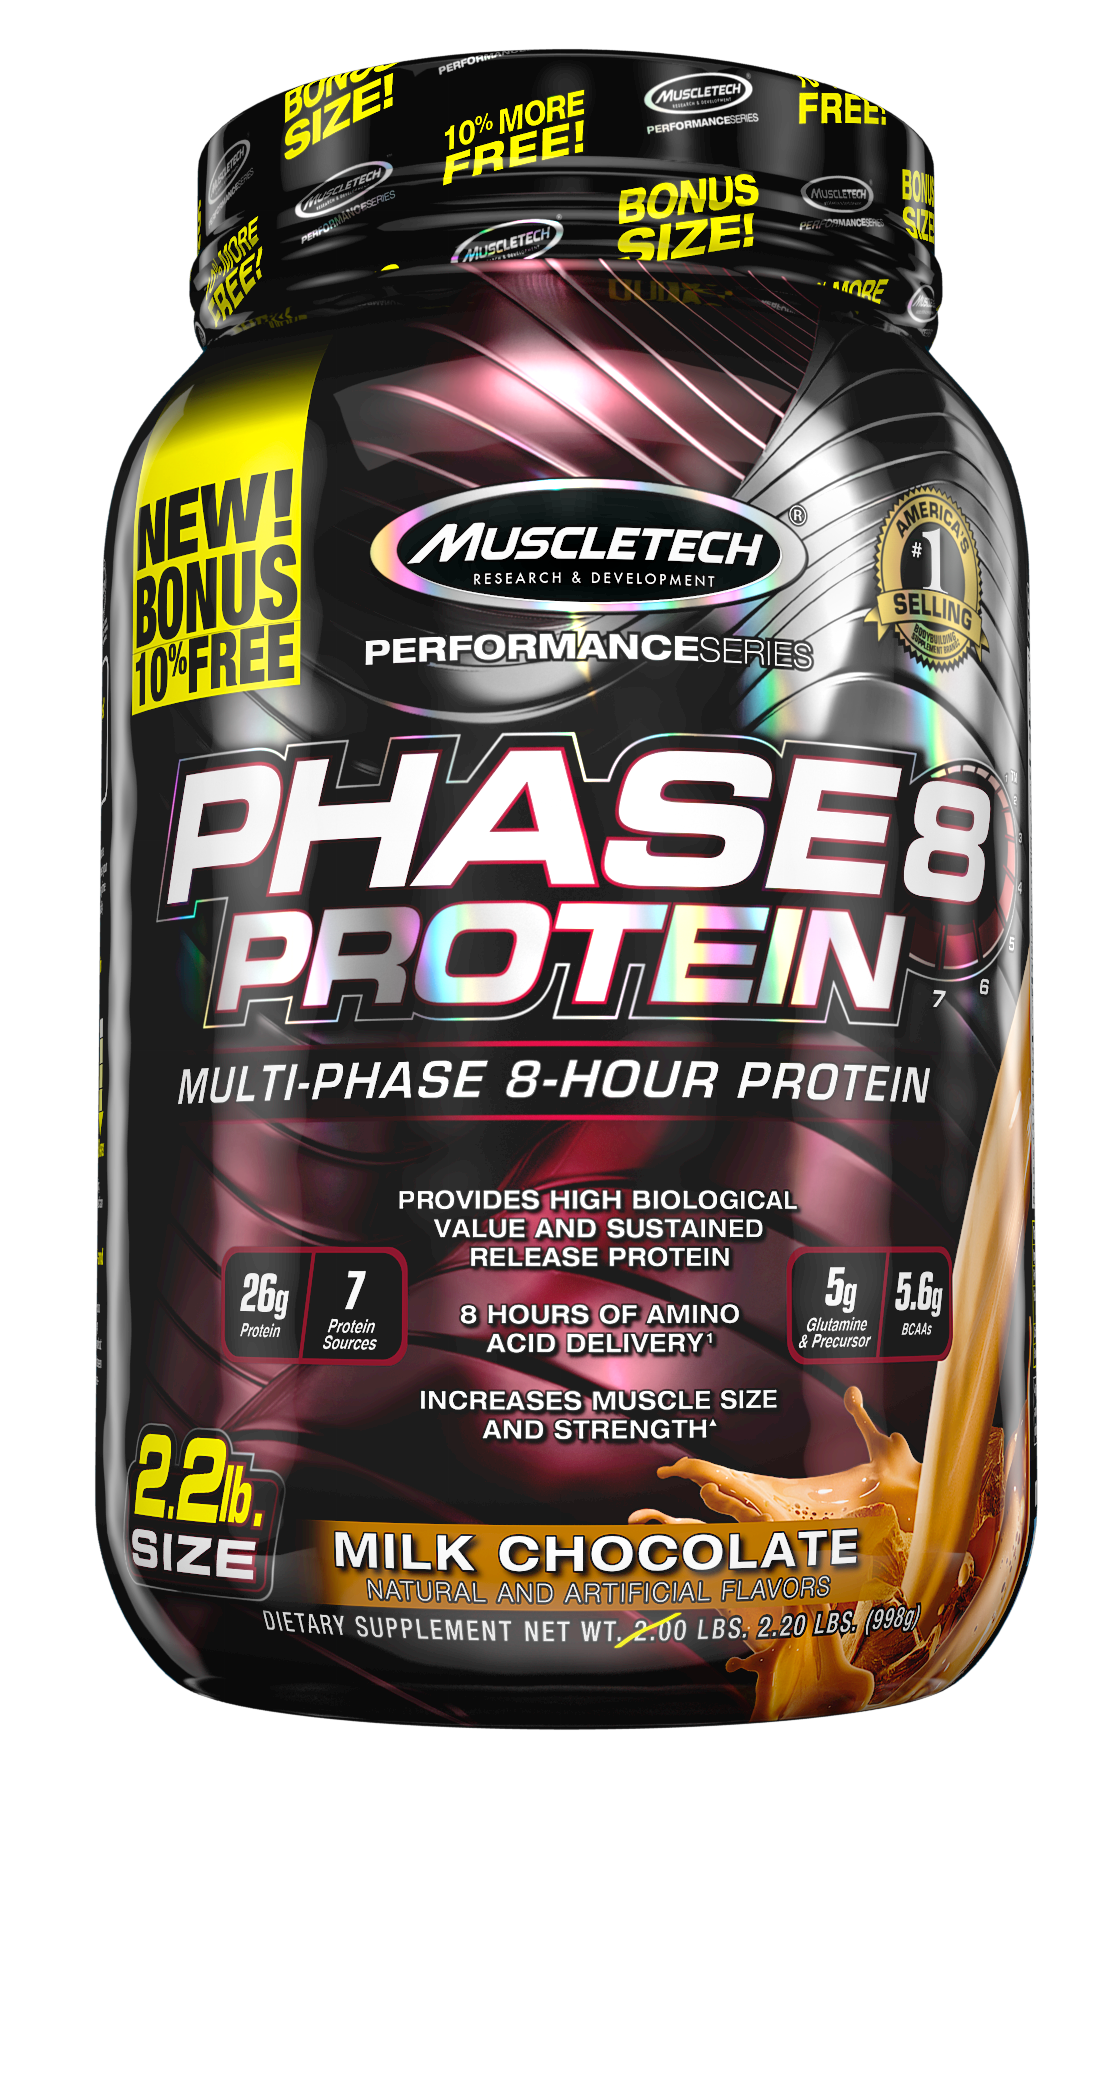 Phase8 Whey Protein Powder, Sustained Release 8-Hour Protein Shake, Milk Chocolate, 22 Servings (2.0lbs) - image 1 of 4